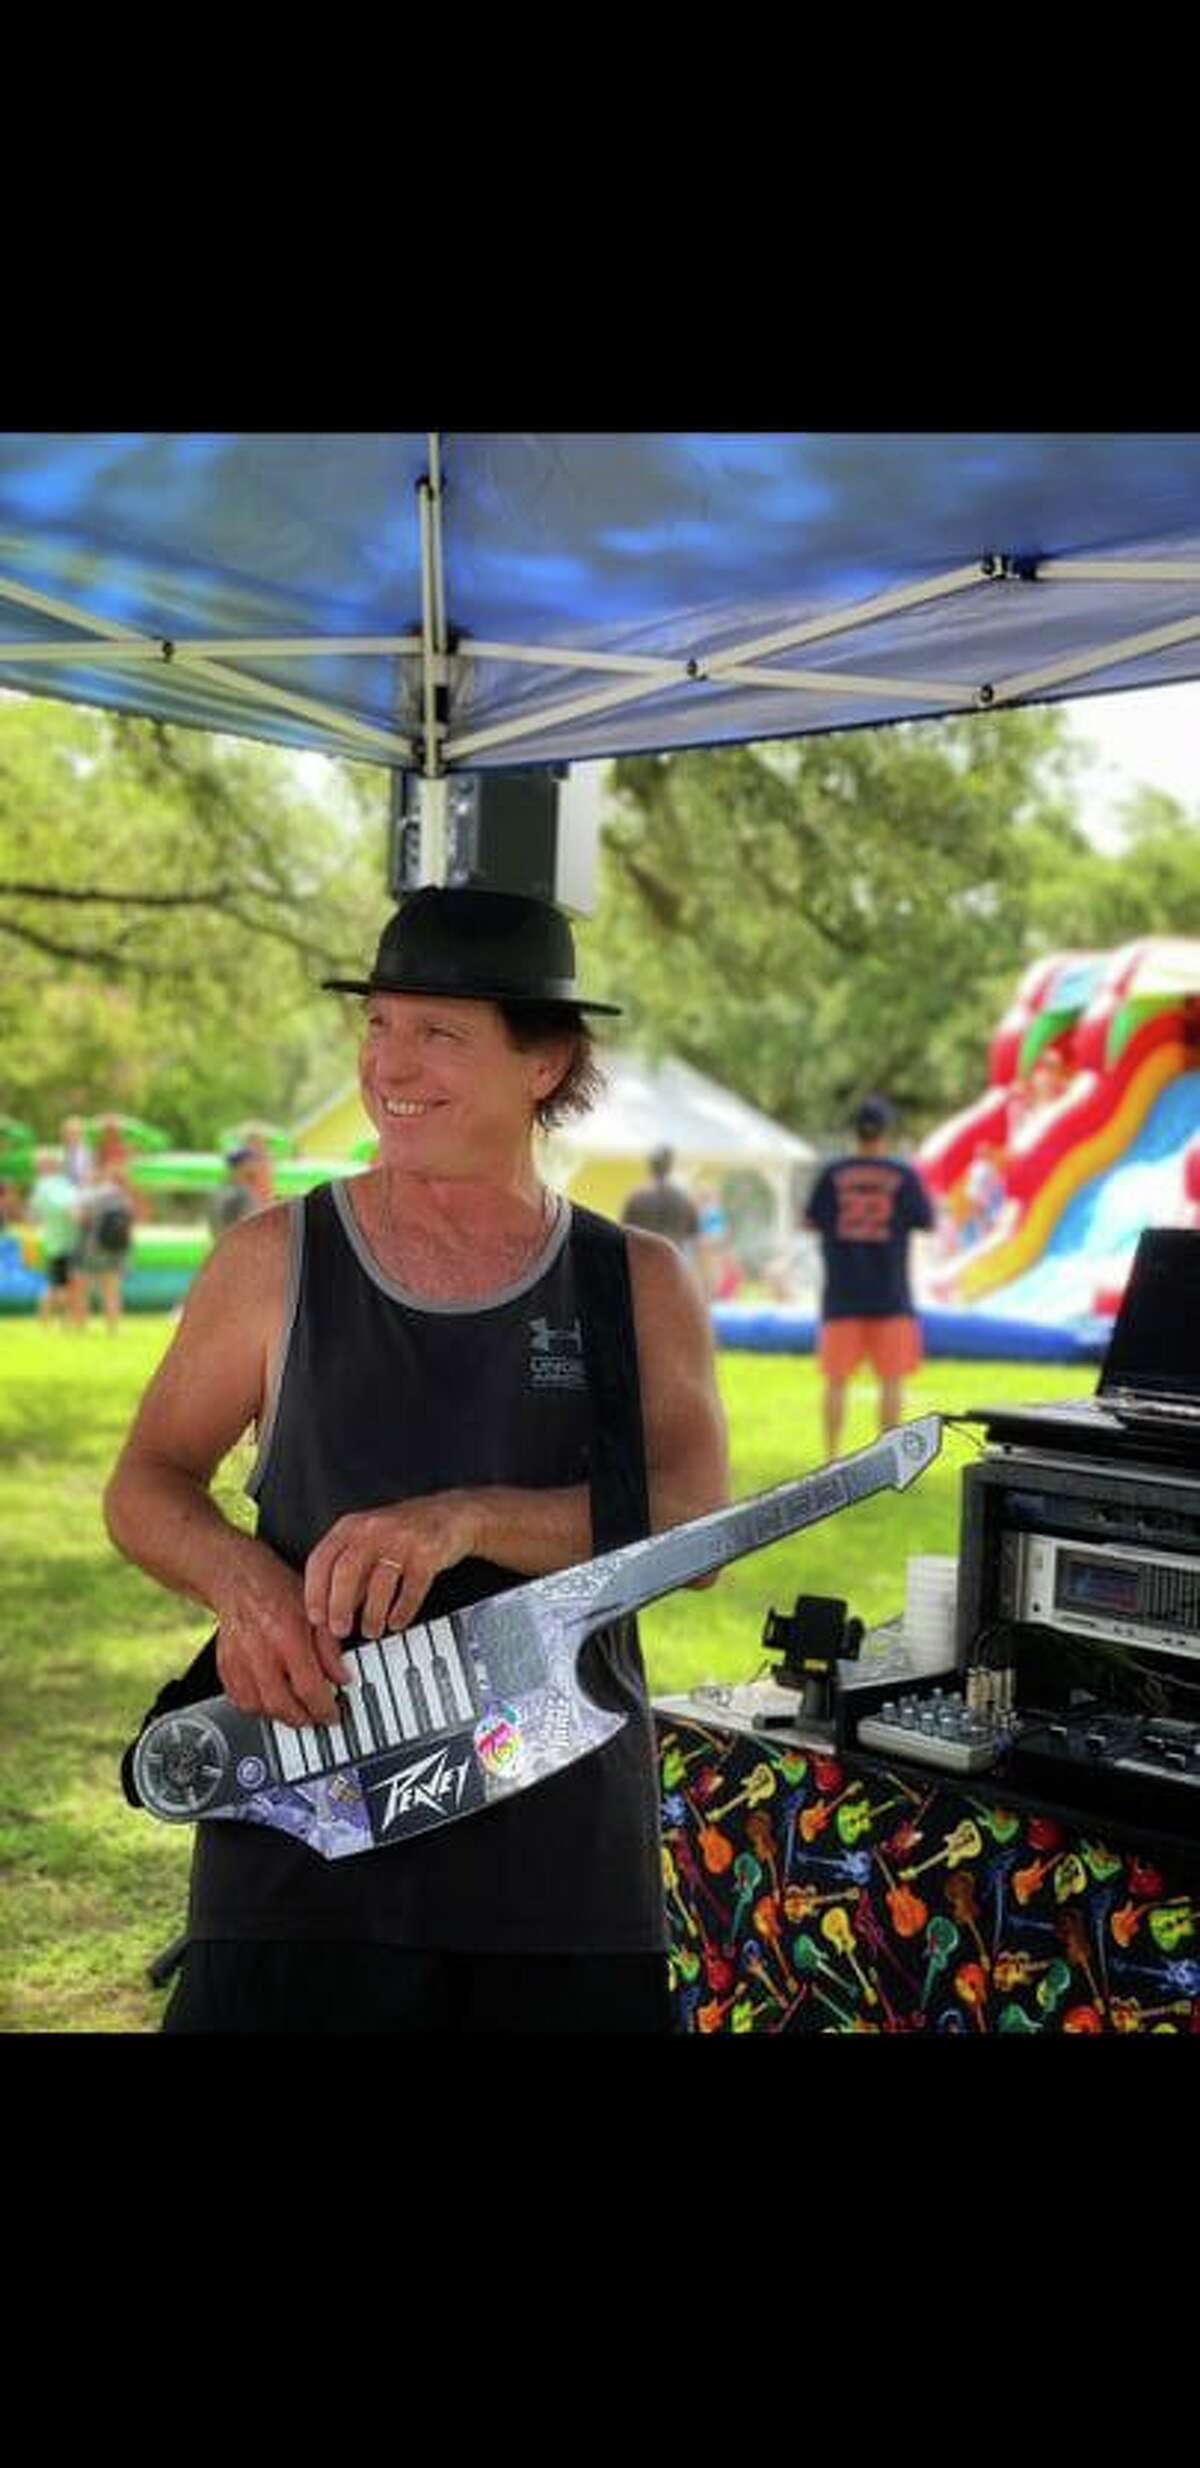 DJ Kevin Smith is known for the variety of hats and wigs he wears while entertaining at events. He has DJ'ed for several events in Montgomery over the past two years.